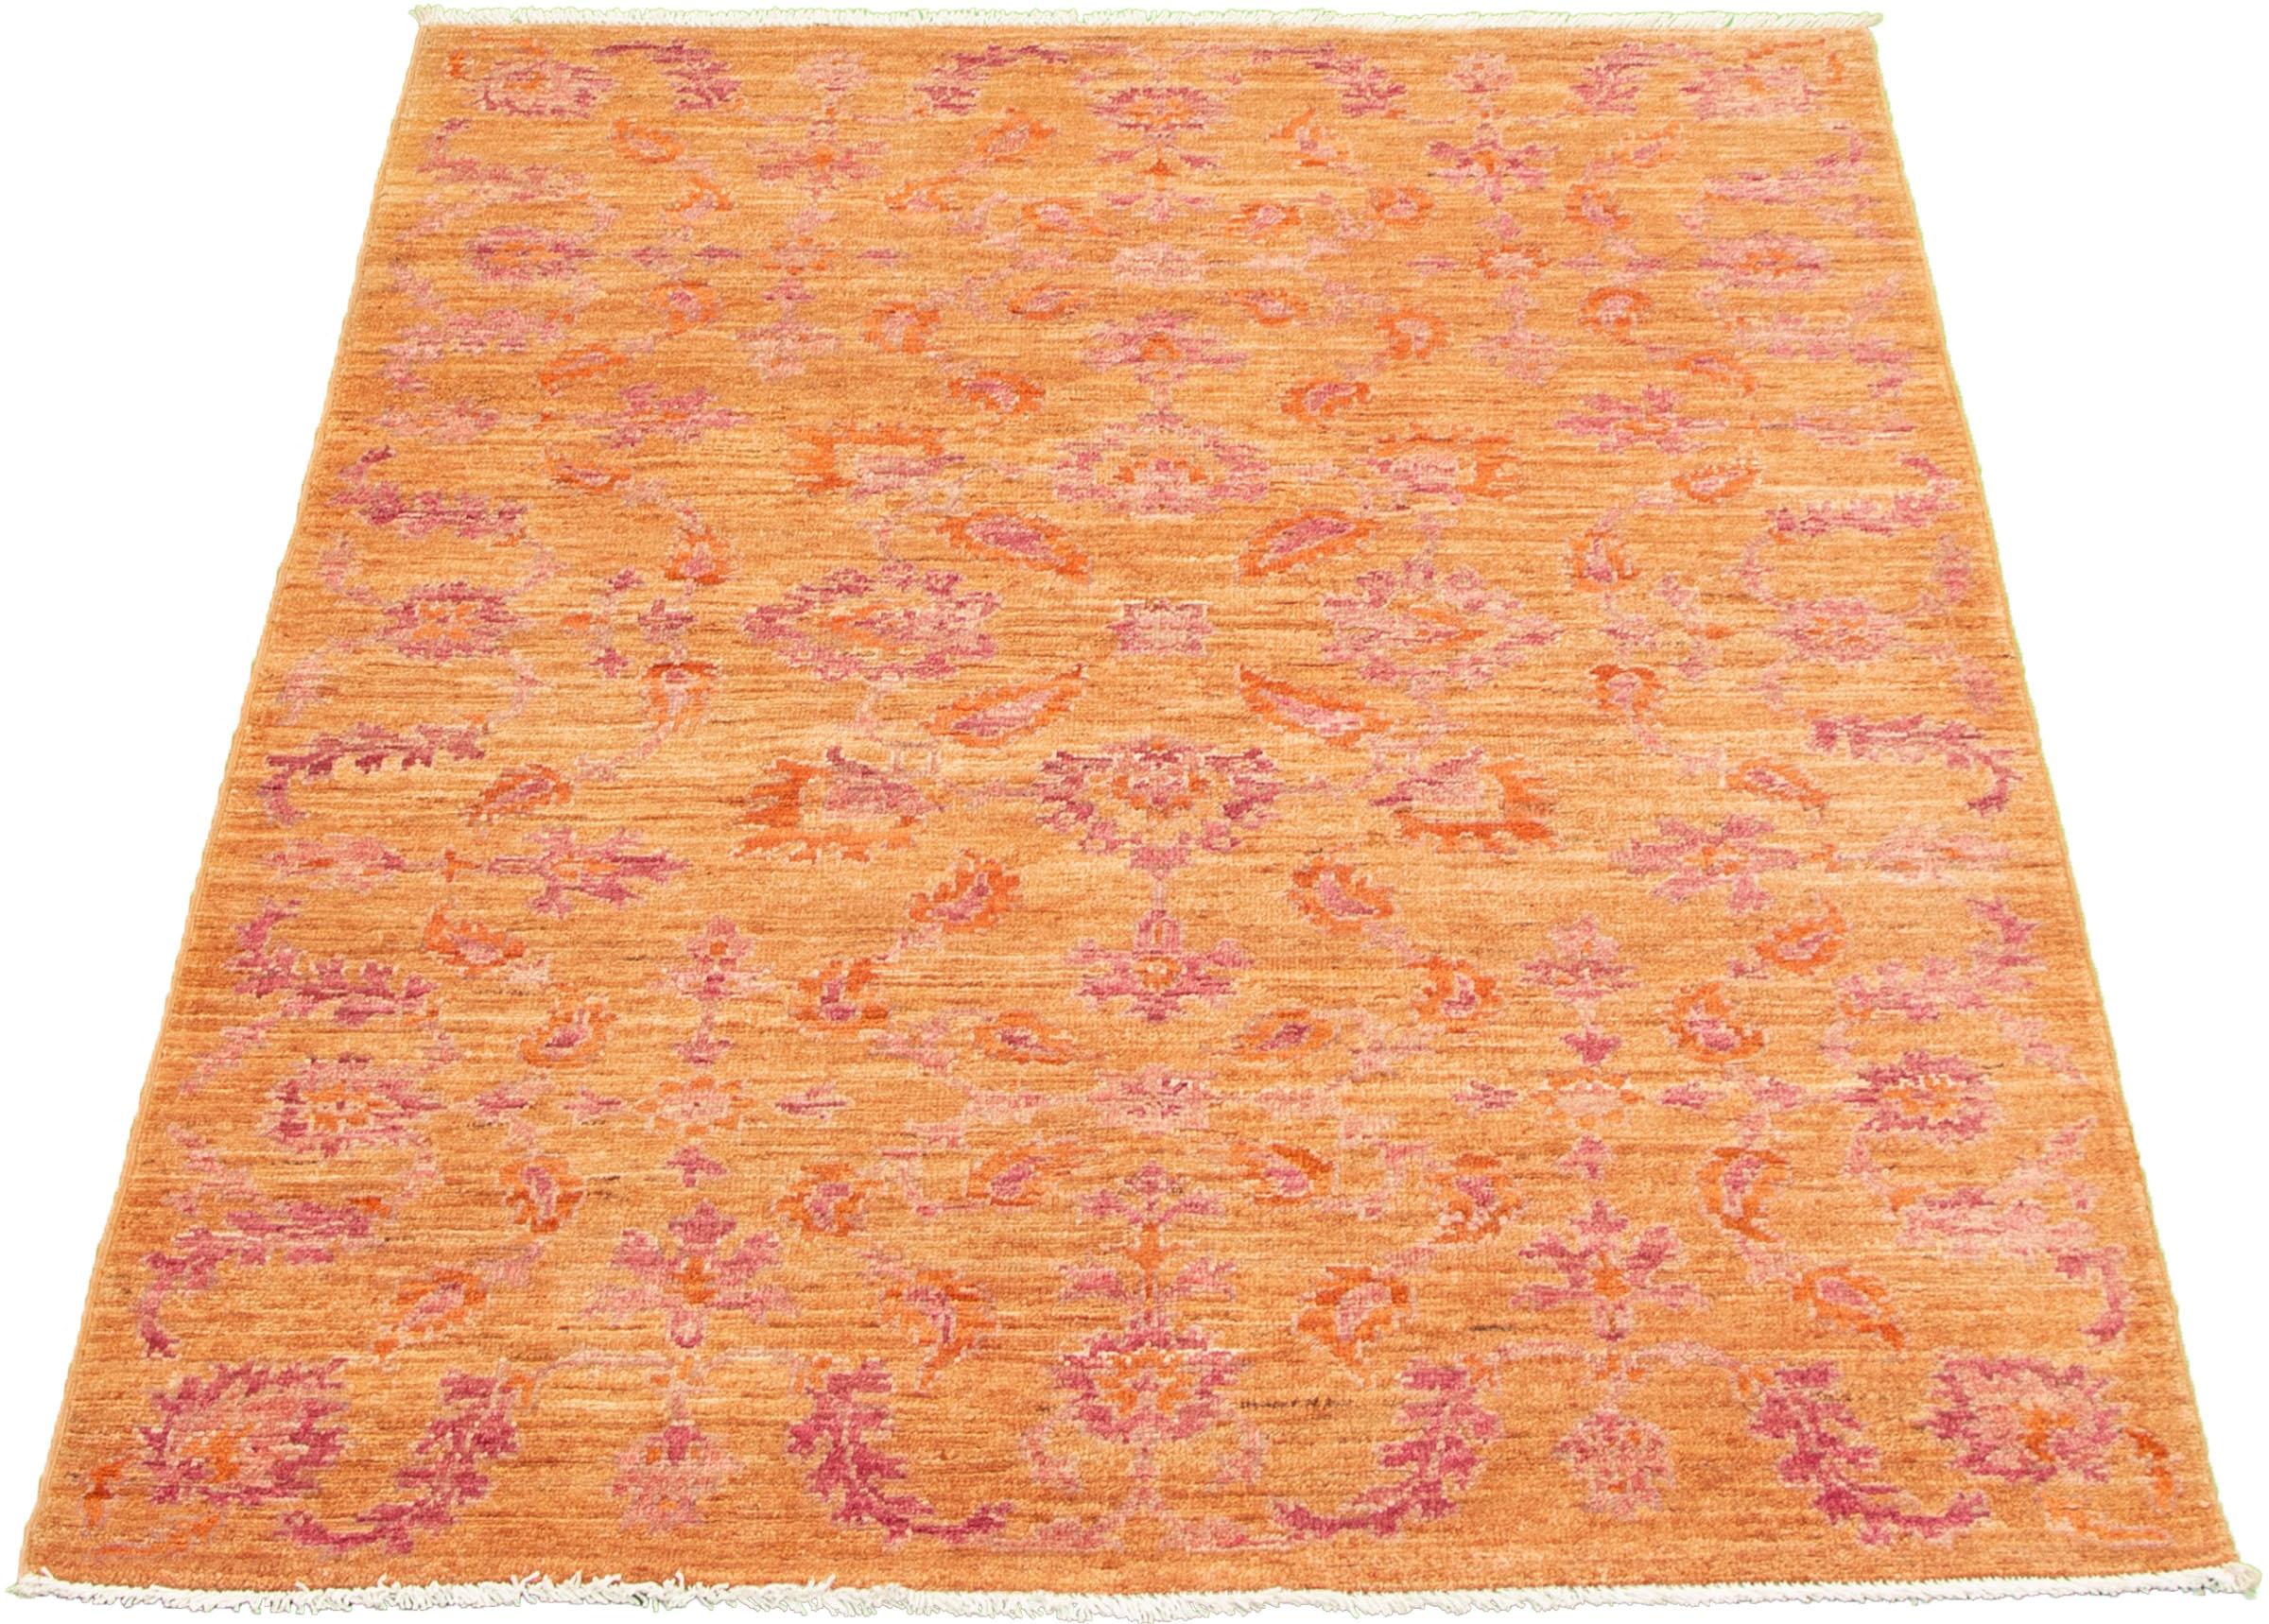 Vegetable Dyed Pink and Orange Wool Persian Oushak Rug, Hand-Knotted, 4’ x 6’ For Sale